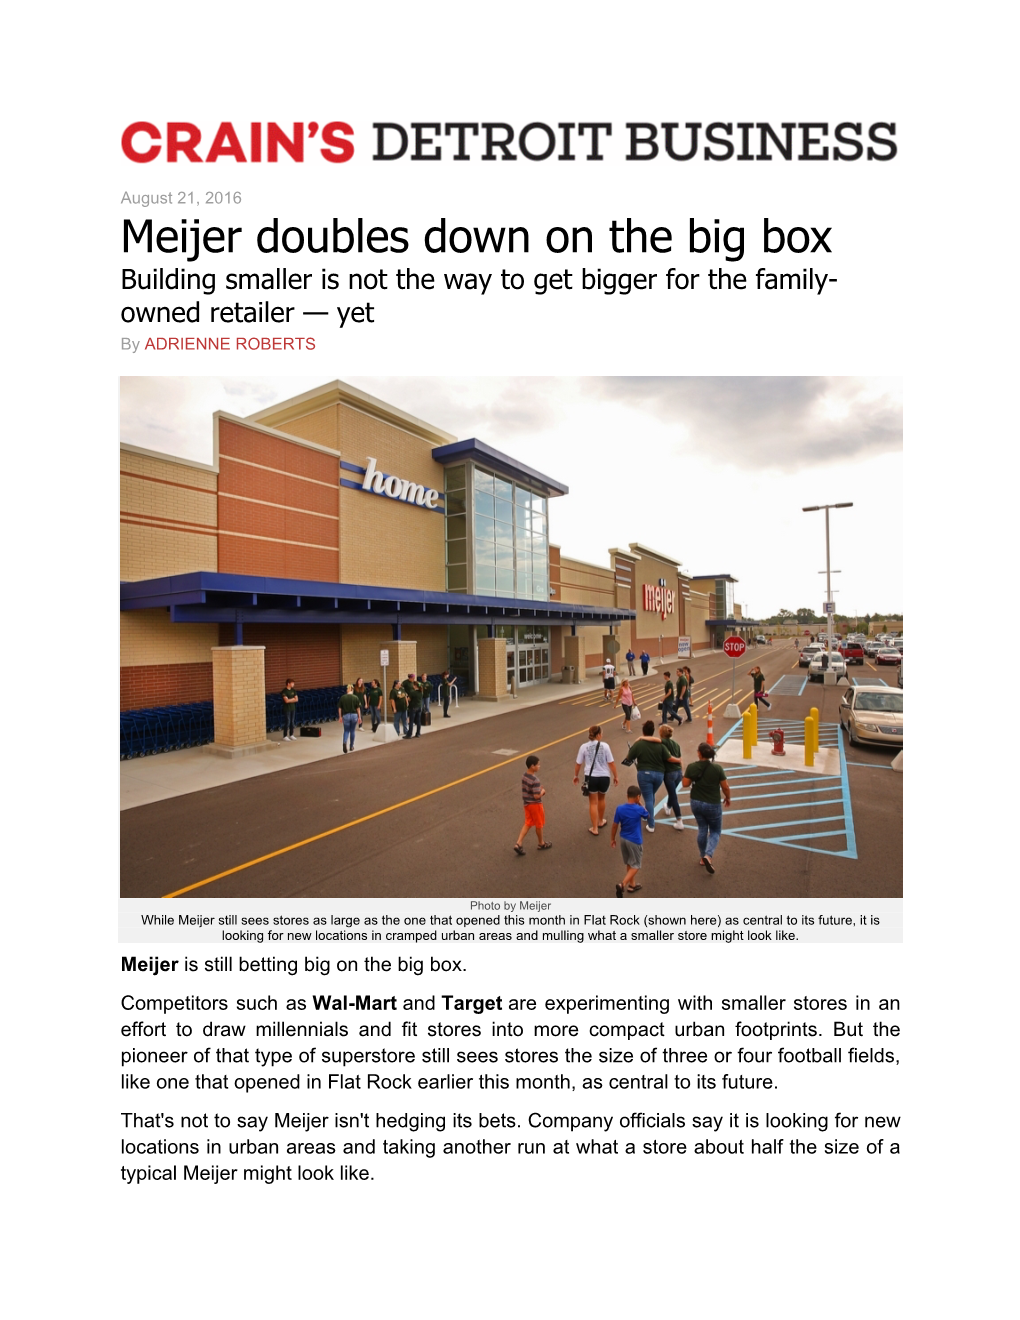 Meijer Doubles Down on the Big Box Building Smaller Is Not the Way to Get Bigger for the Family- Owned Retailer — Yet by ADRIENNE ROBERTS